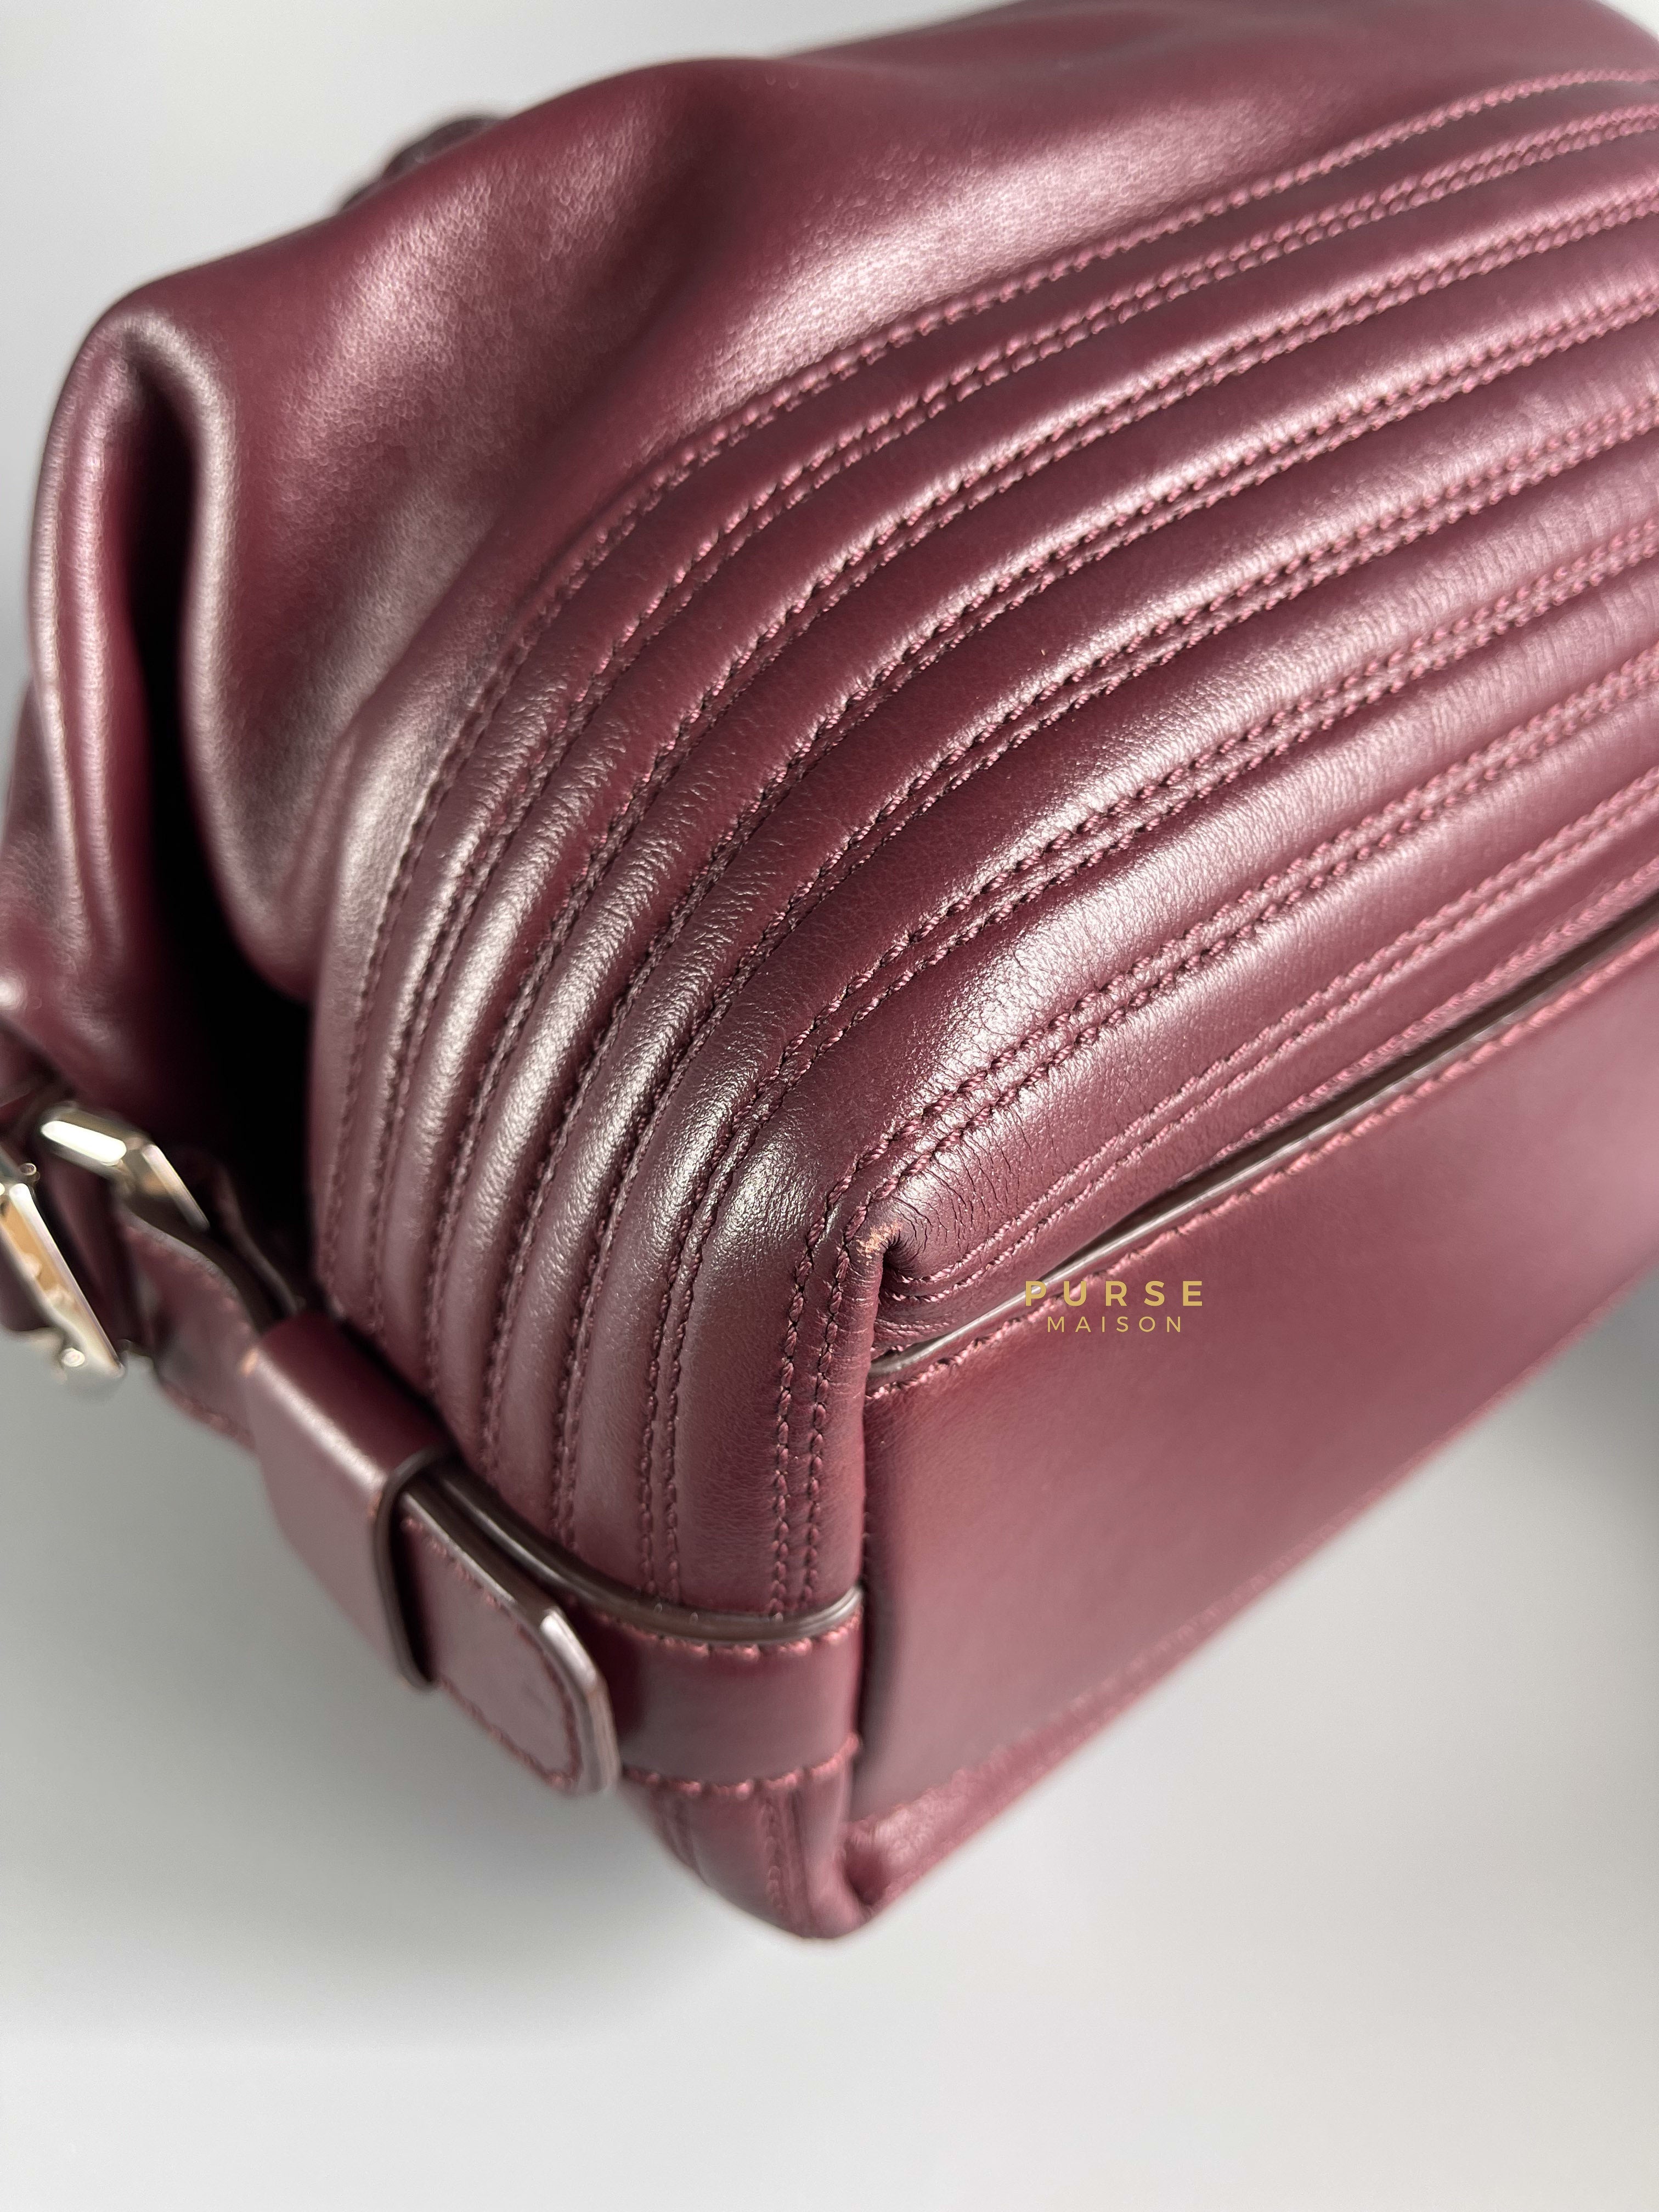 Givenchy Nightingale Maroon Small Bag | Purse Maison Luxury Bags Shop